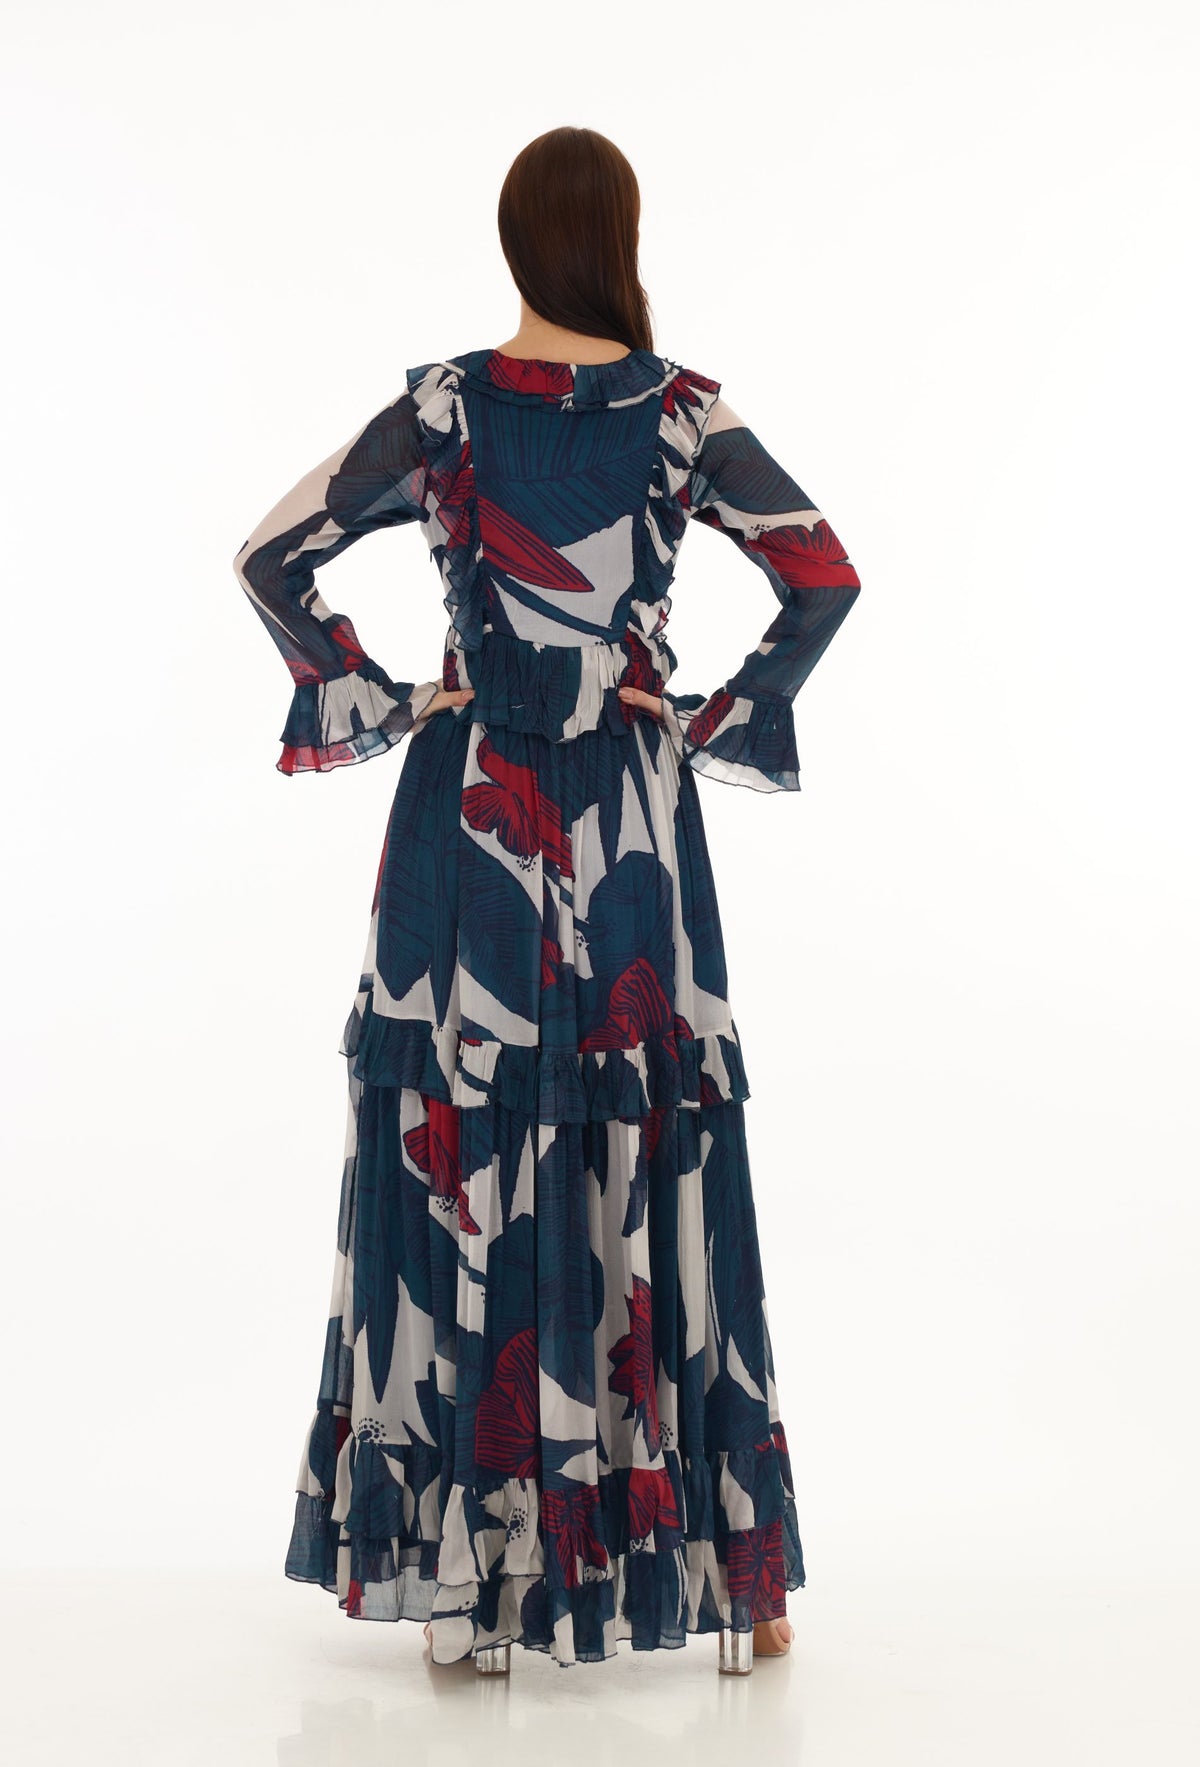 BLUE, OFF WHITE & RED FLORAL FRILL LONG DRESS